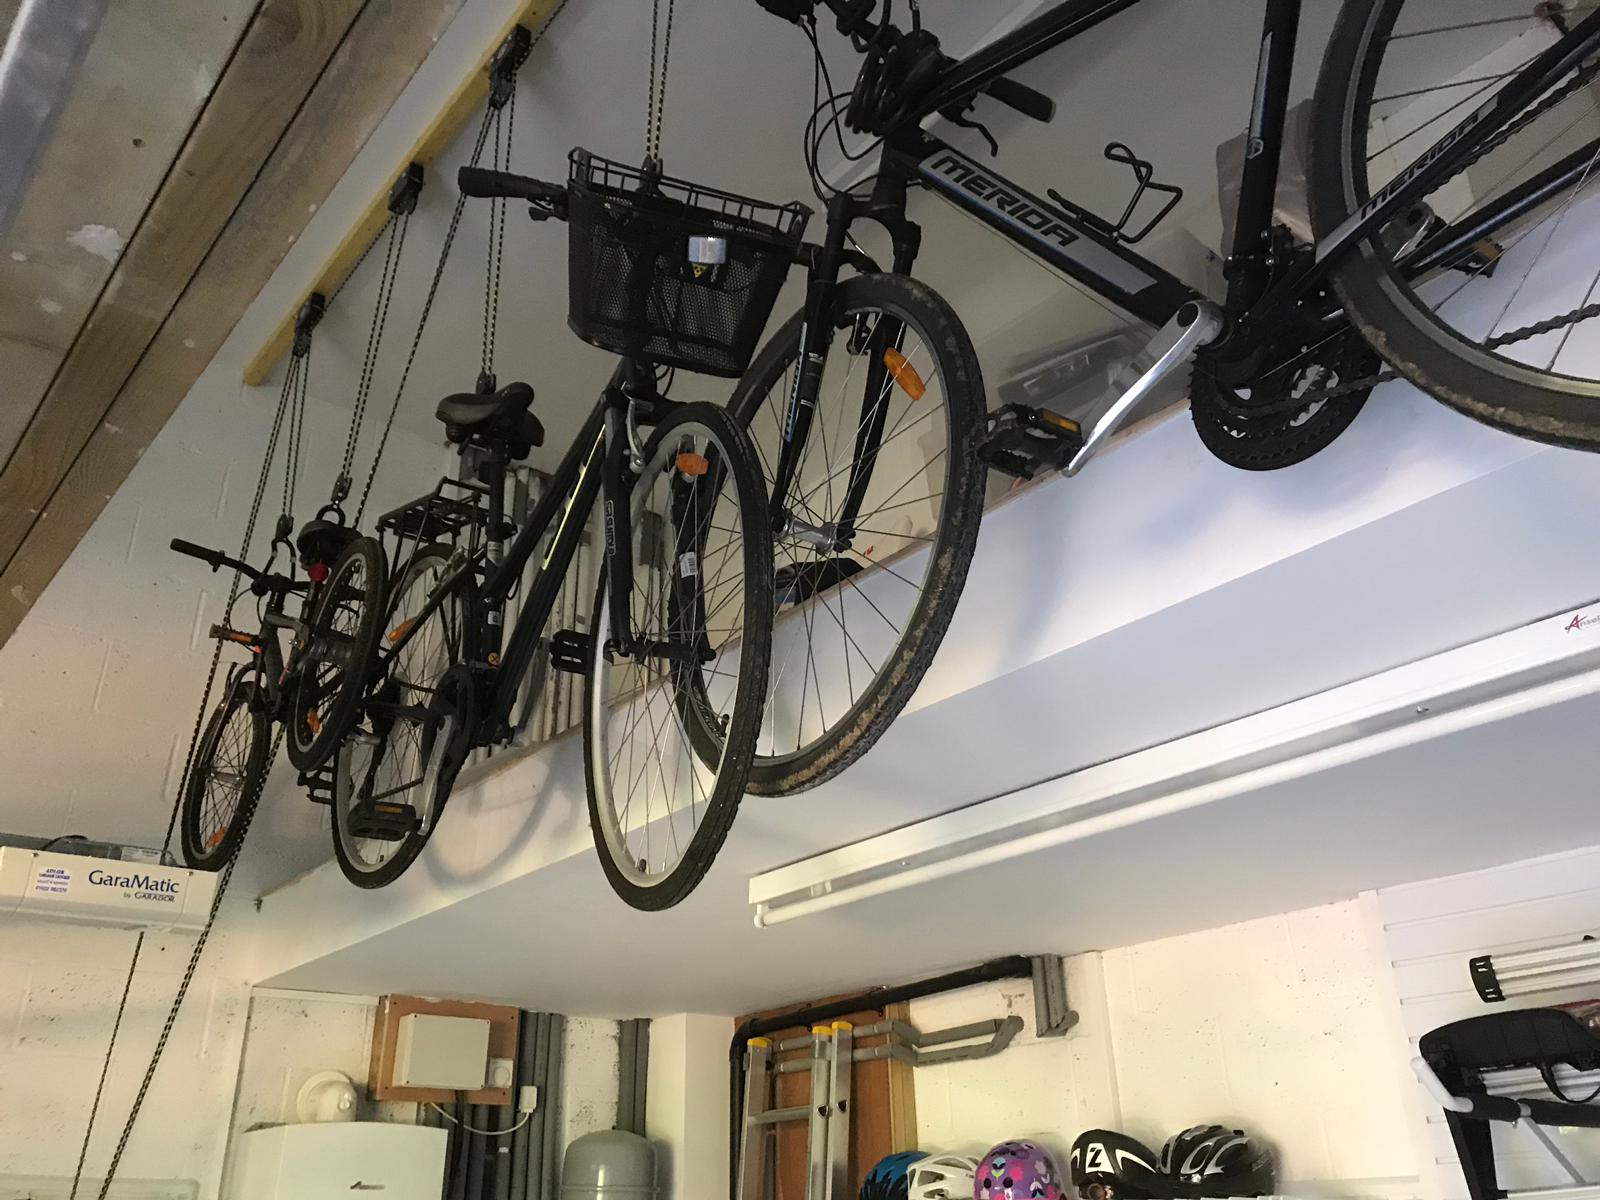 Ceiling storage for your bikes